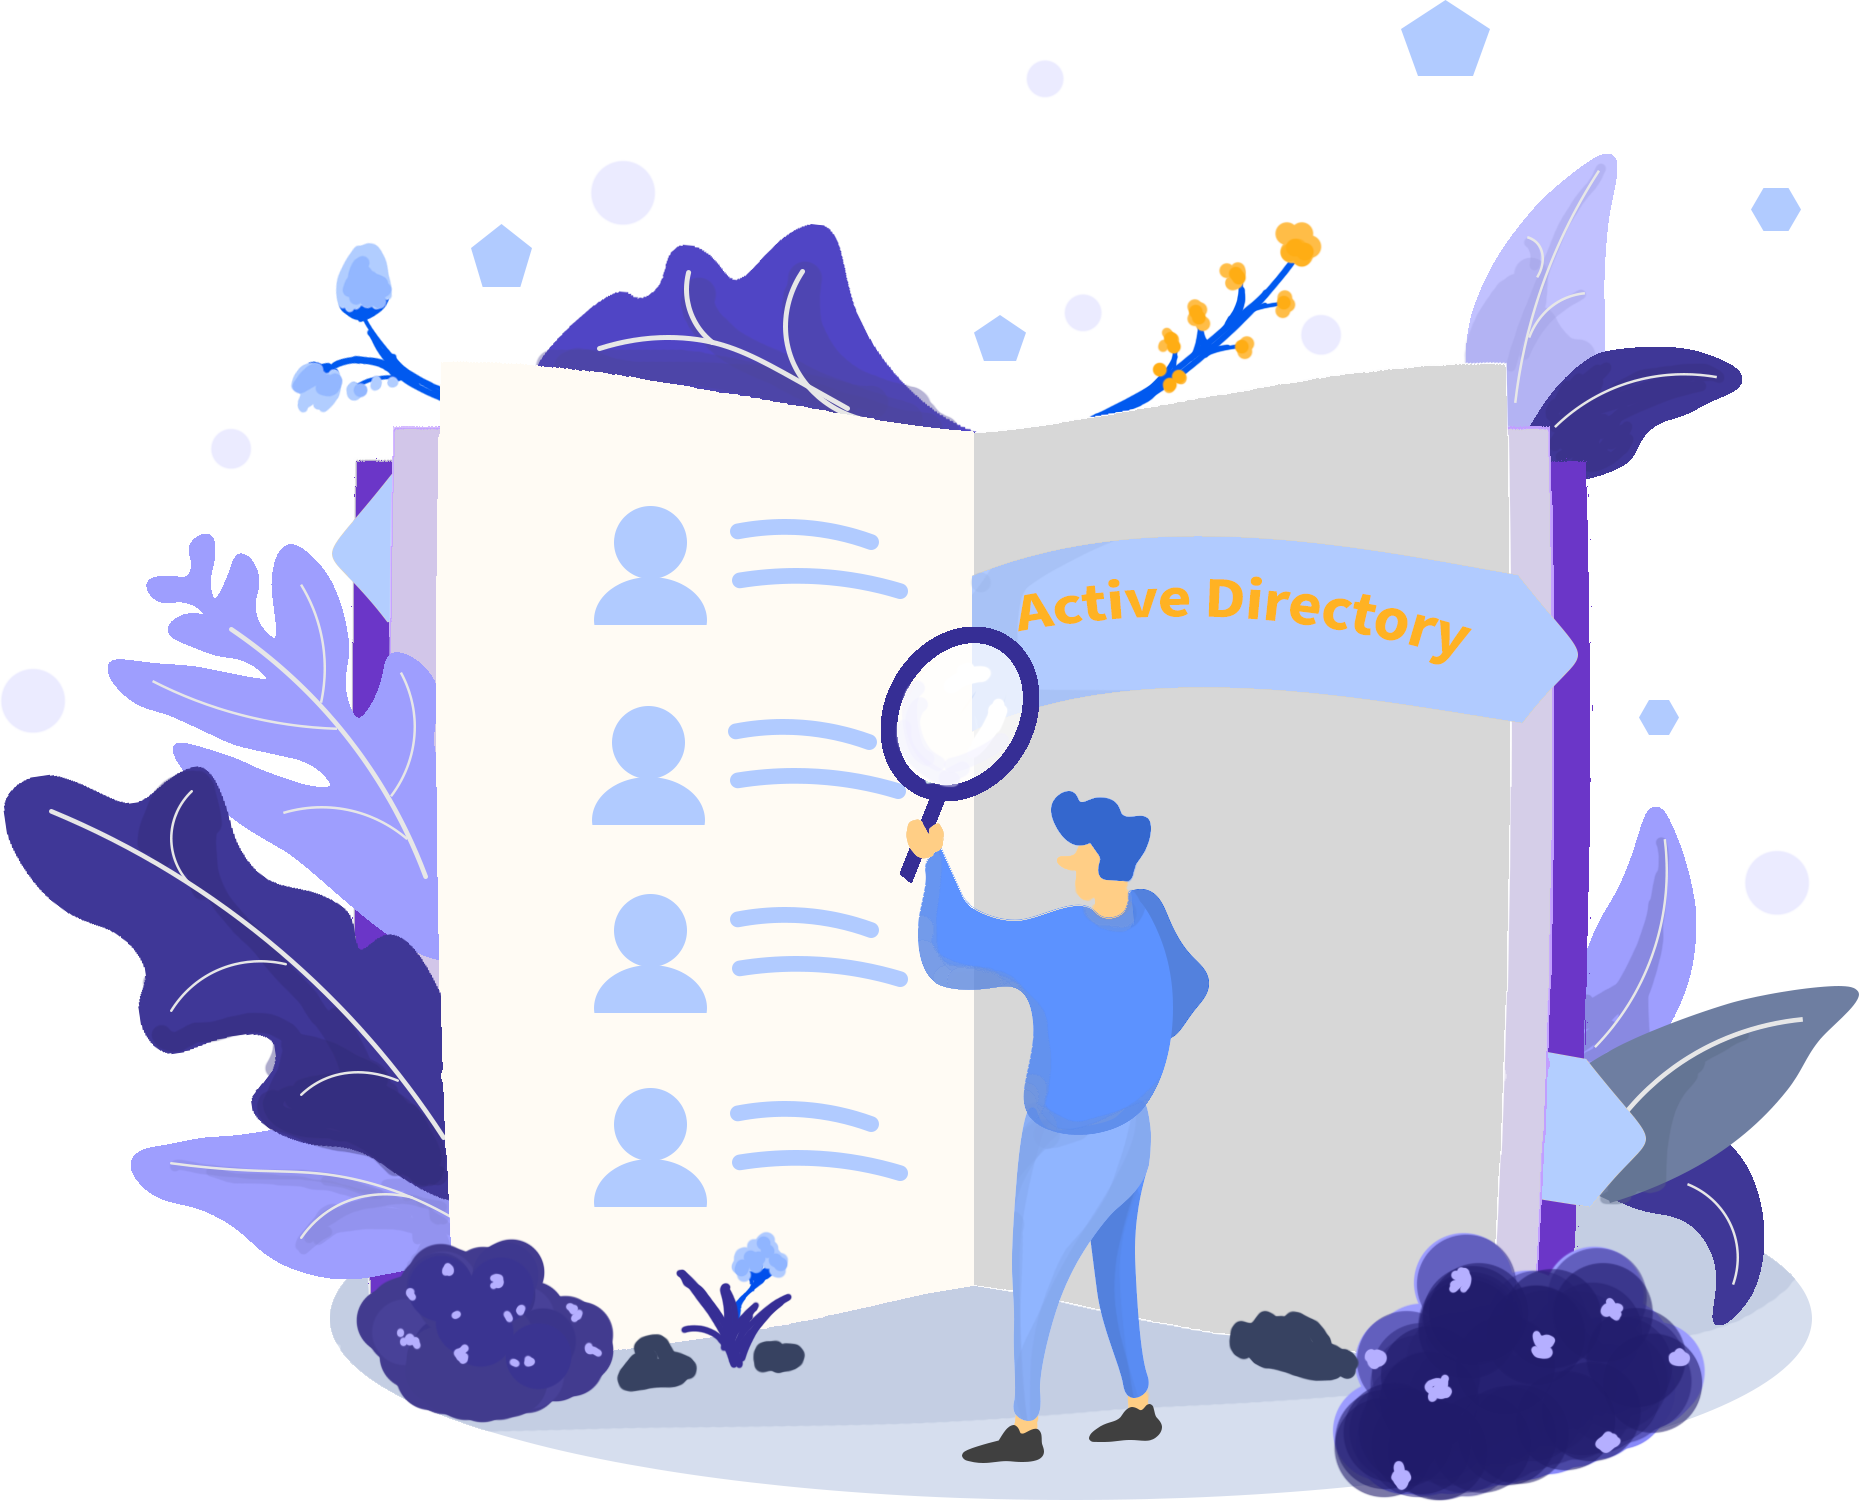 Staff Employee business directory for active directory | Directory Search